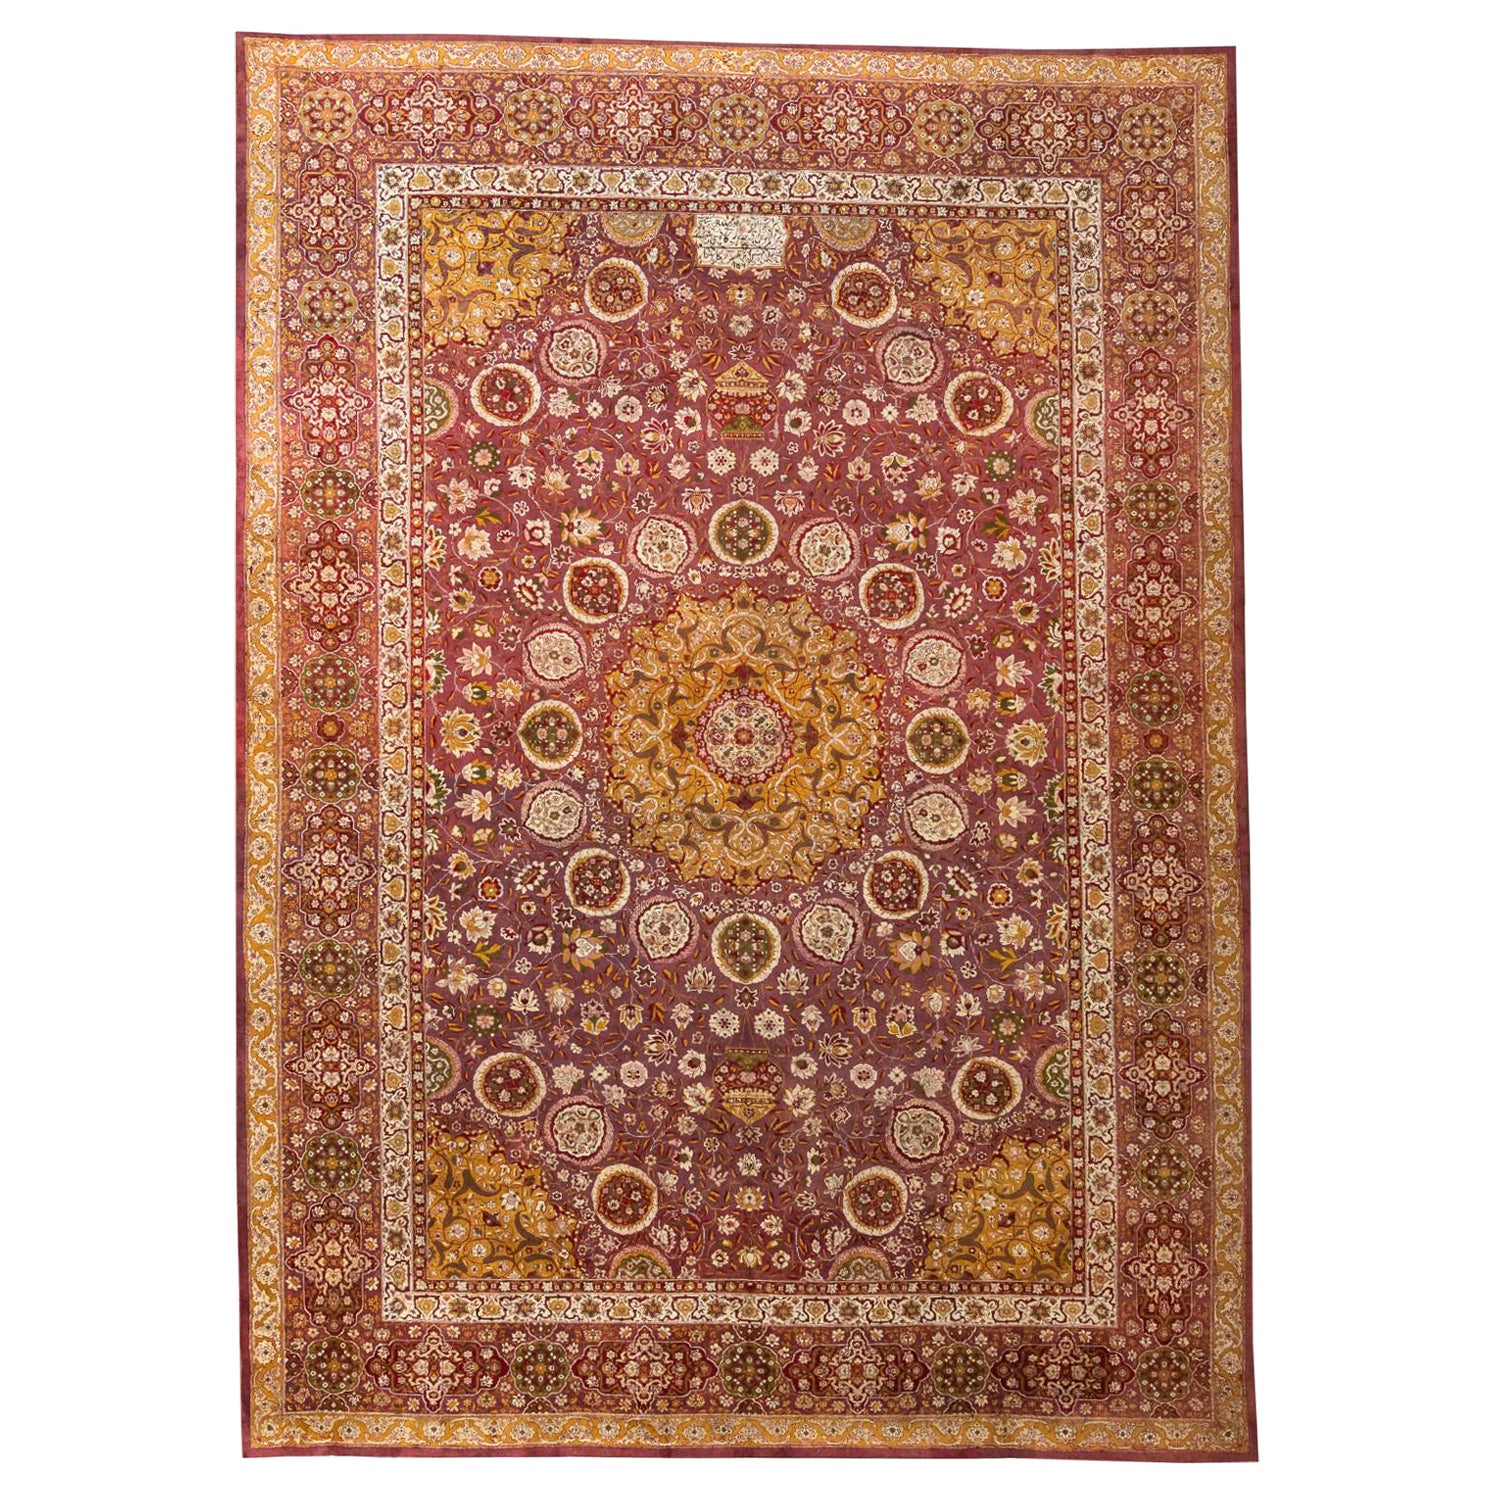 Agra - North India

This is a 120-year-old monumental Agra rug in excellent condition. This piece was inspired by the famous Persian rug, Ardabil, made in the 16th Century for the Persian court. The main field of the rug is woven in marsala. Sixteen